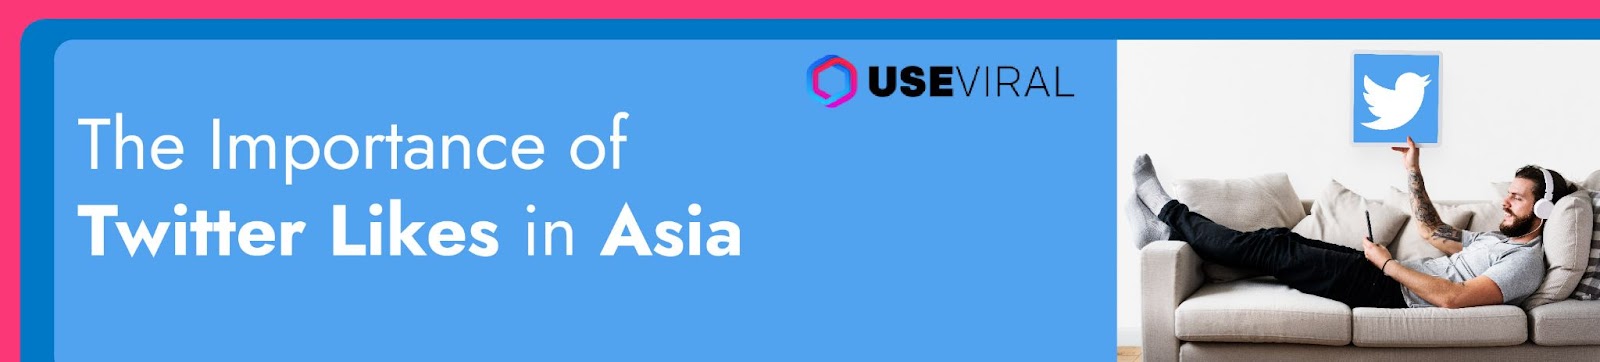 The Importance of Twitter Likes in Asia